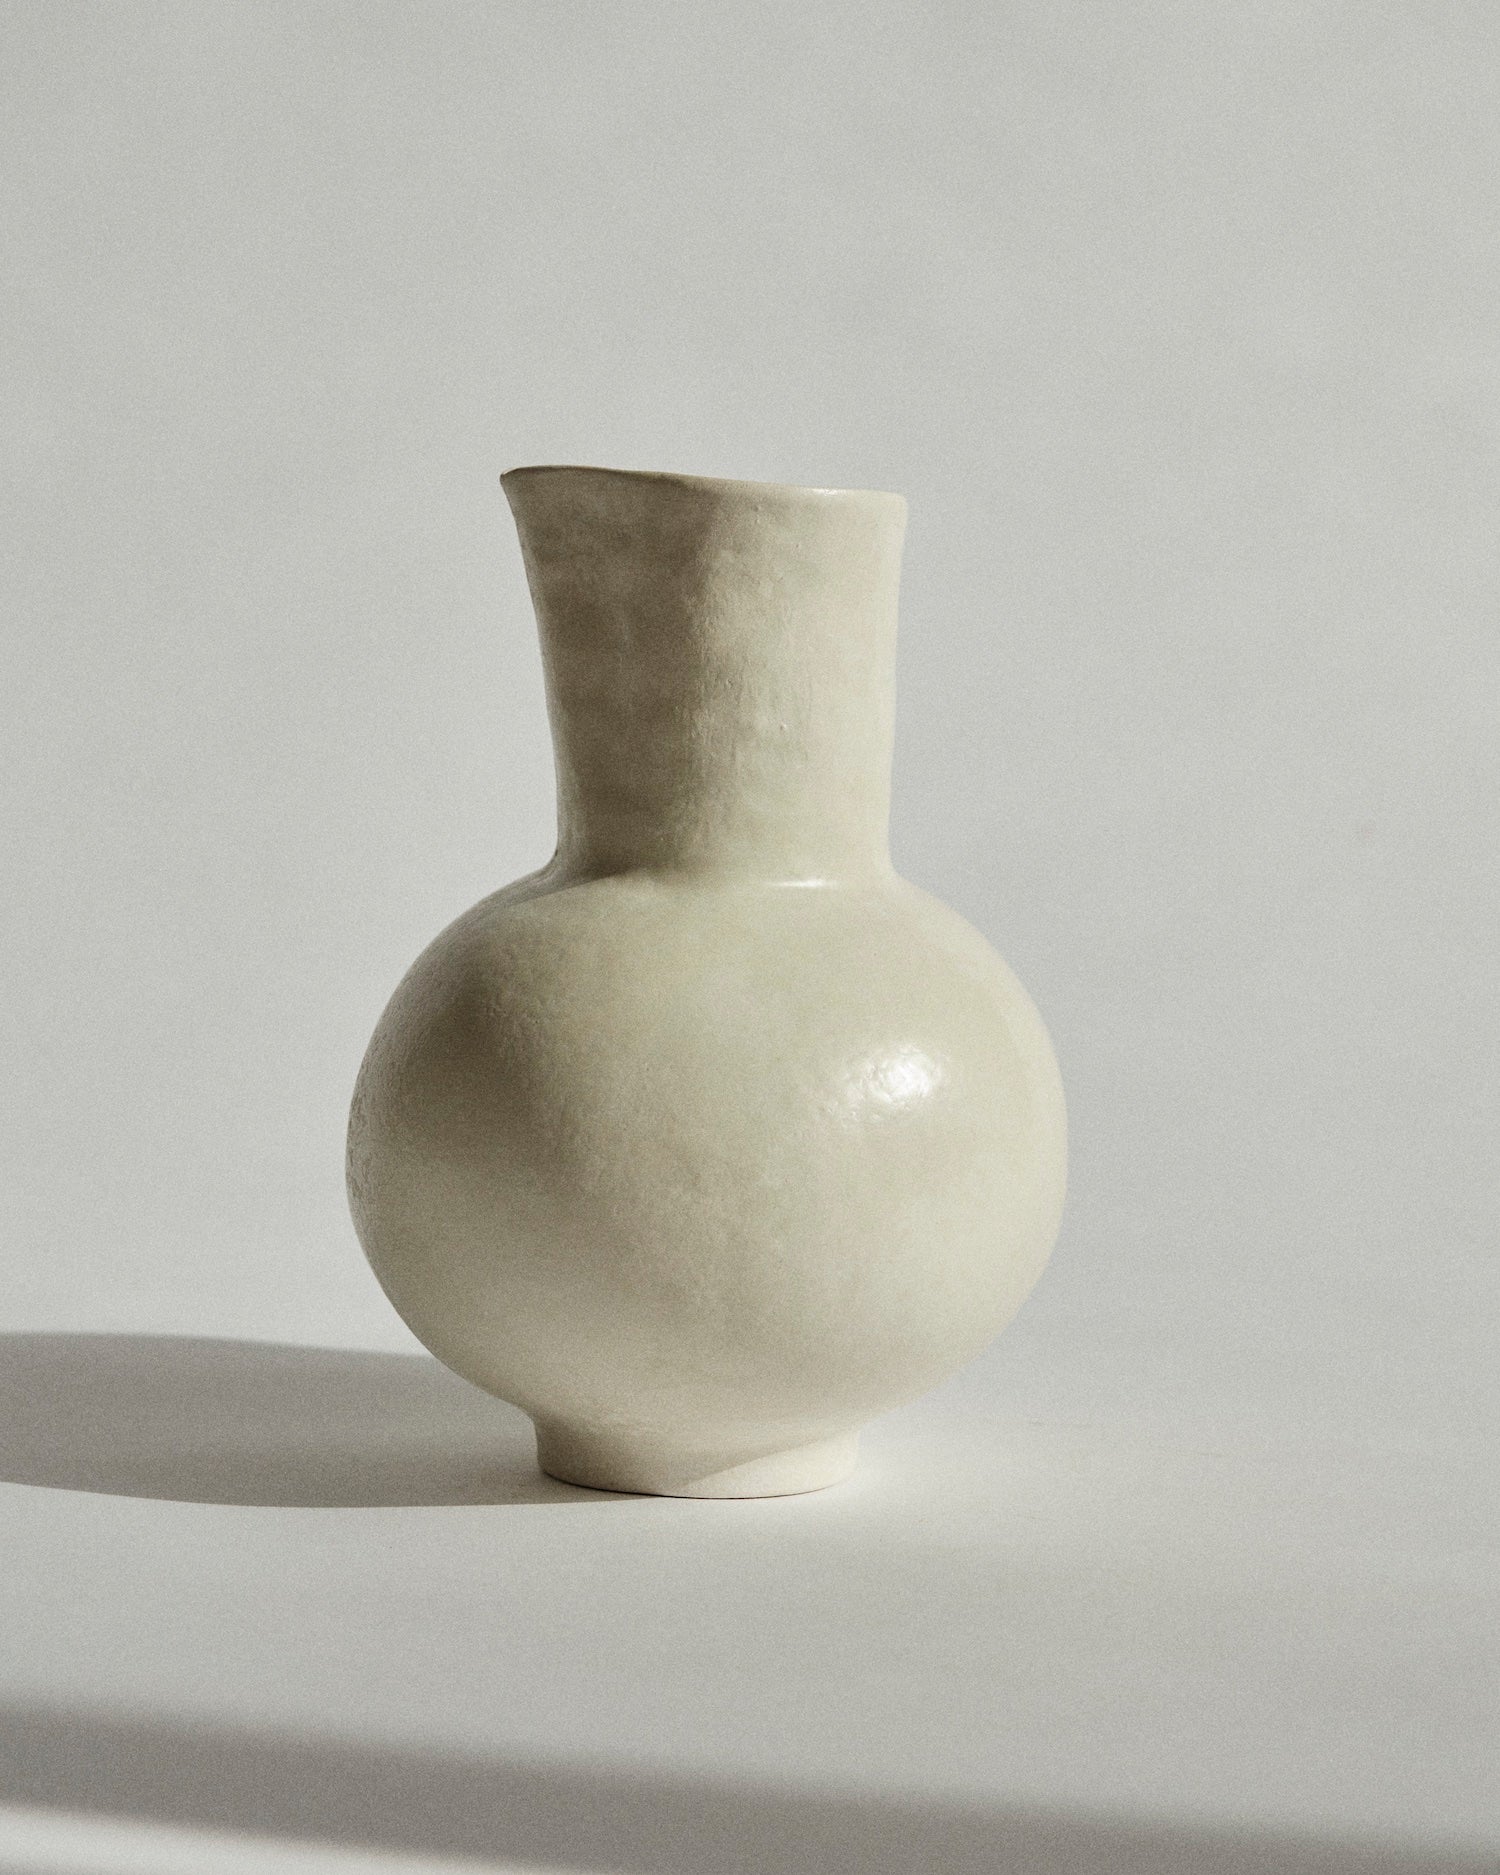 Water Pitcher. Footed stoneware jug with wide, rounded bodice and narrow, spouted neck.